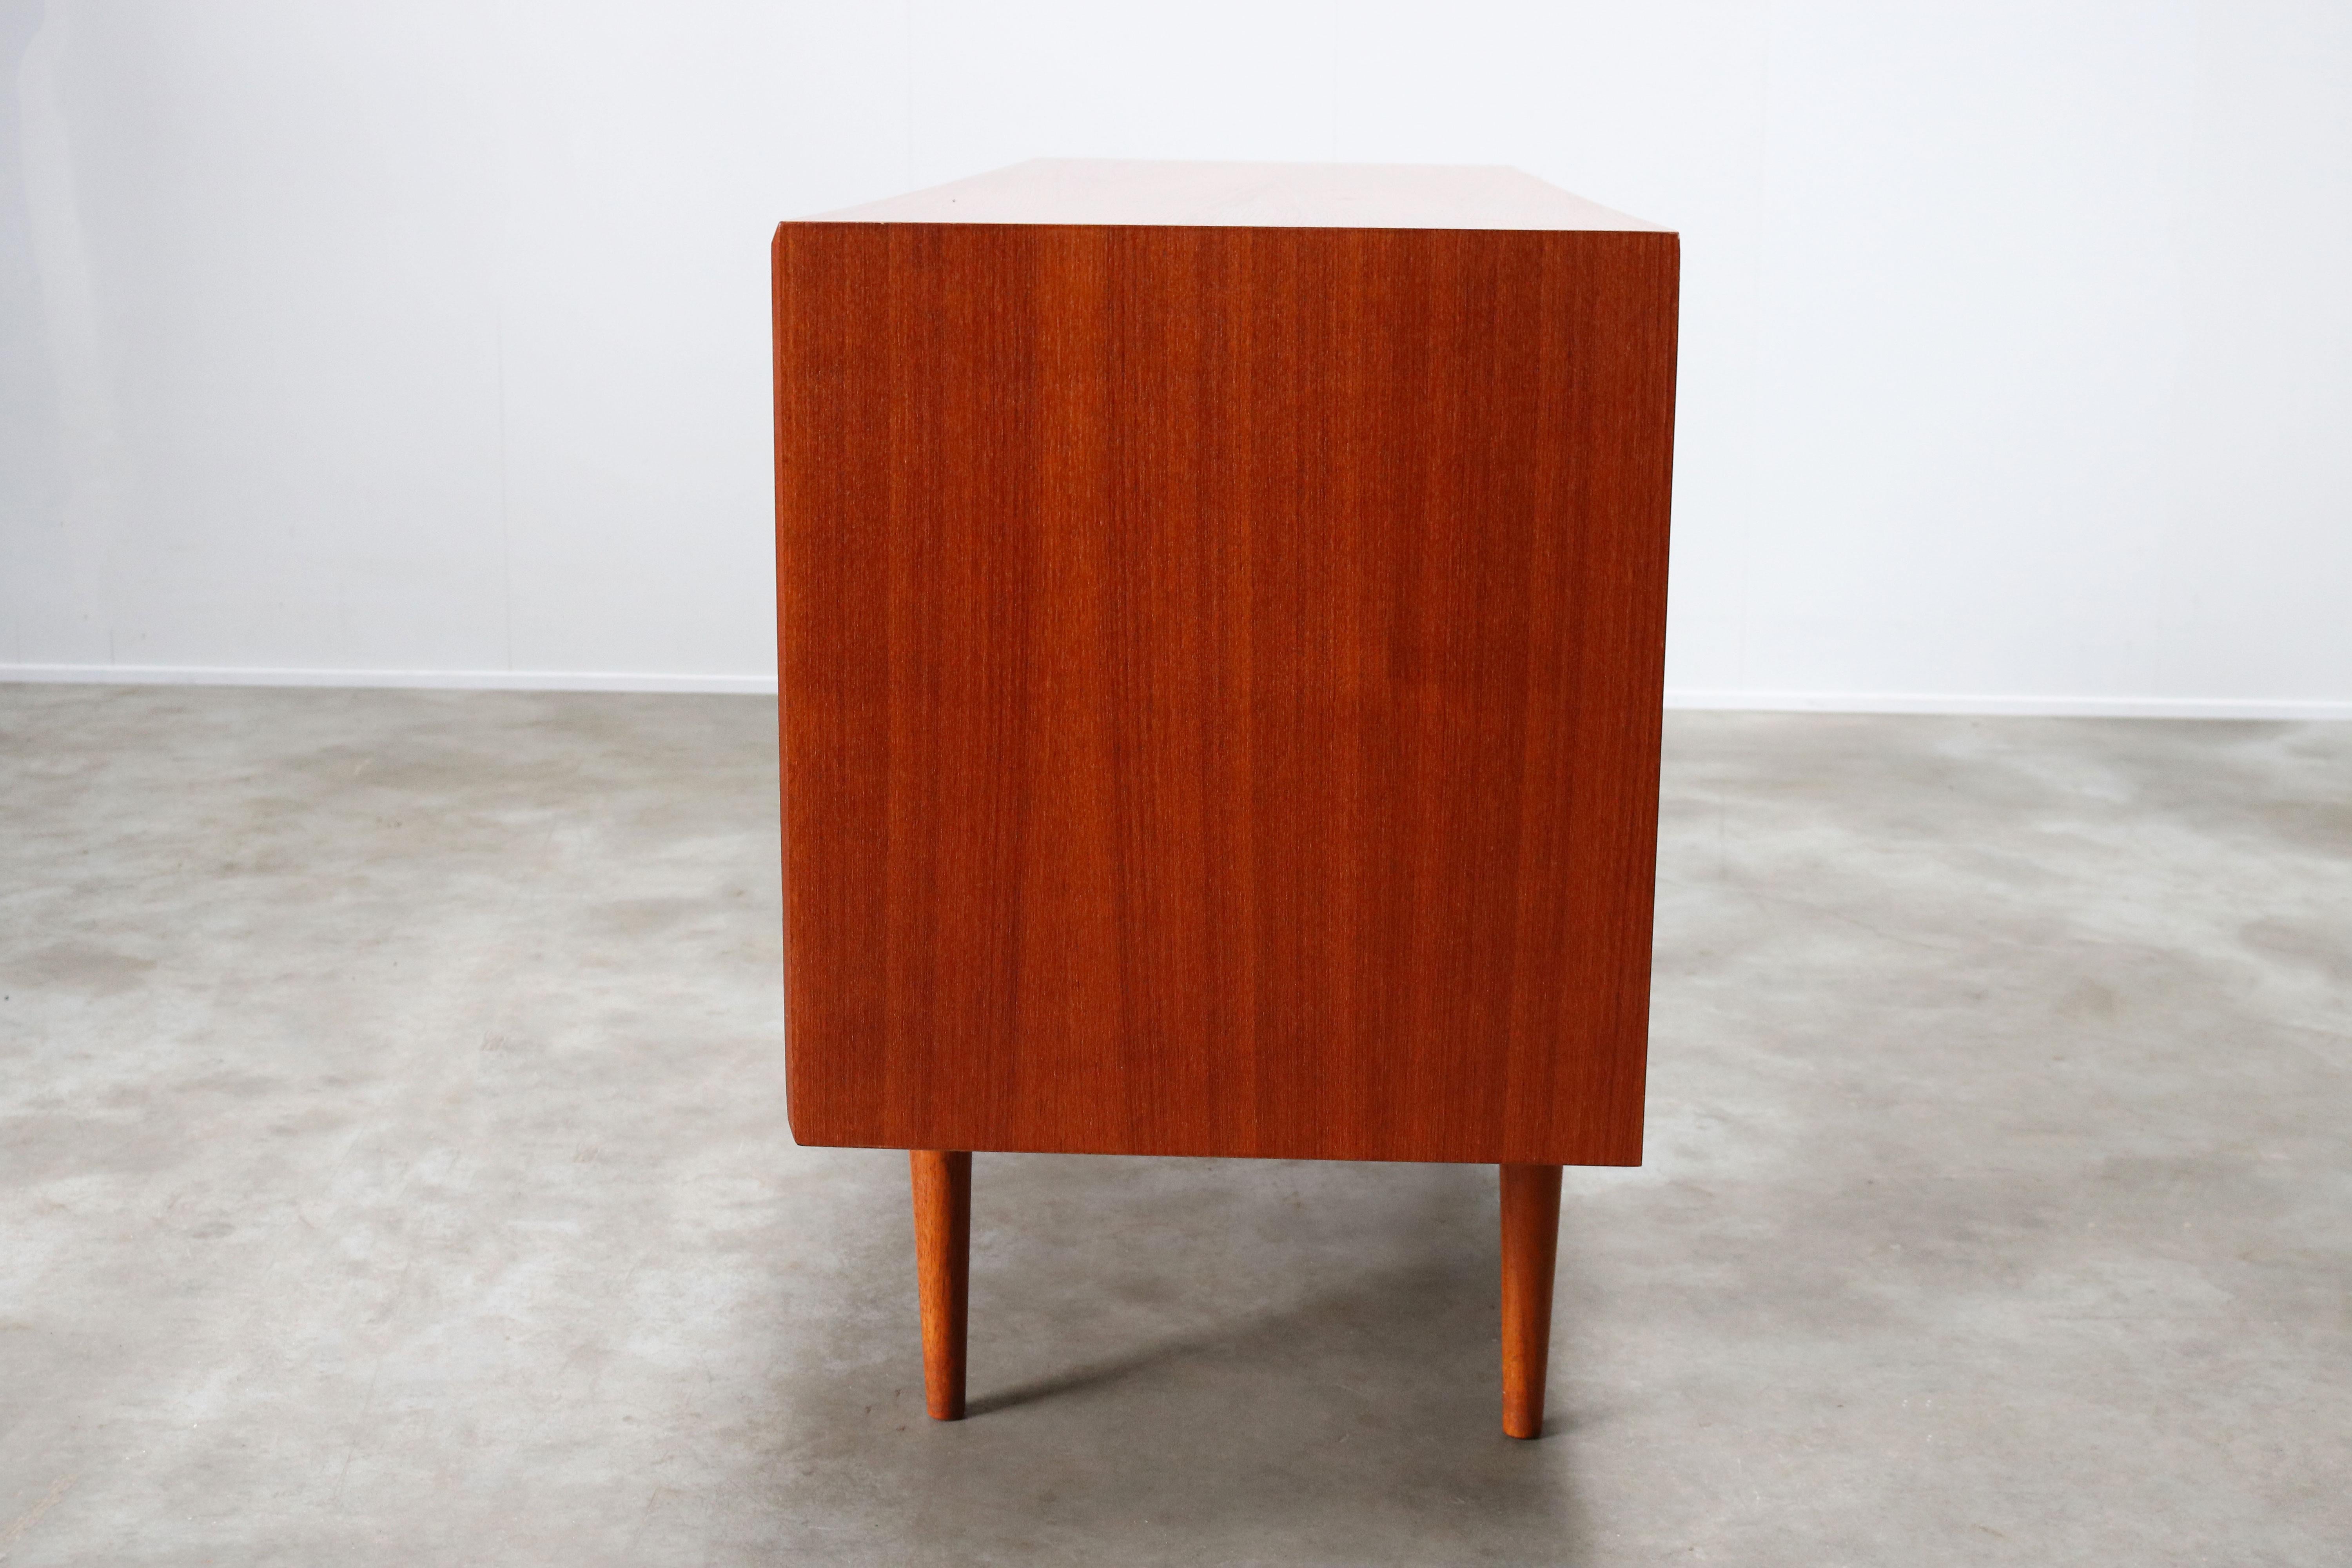 Small Rare Danish Sideboard / Credenza by Svend Aage Madsen for Faarup 1950 Teak 9